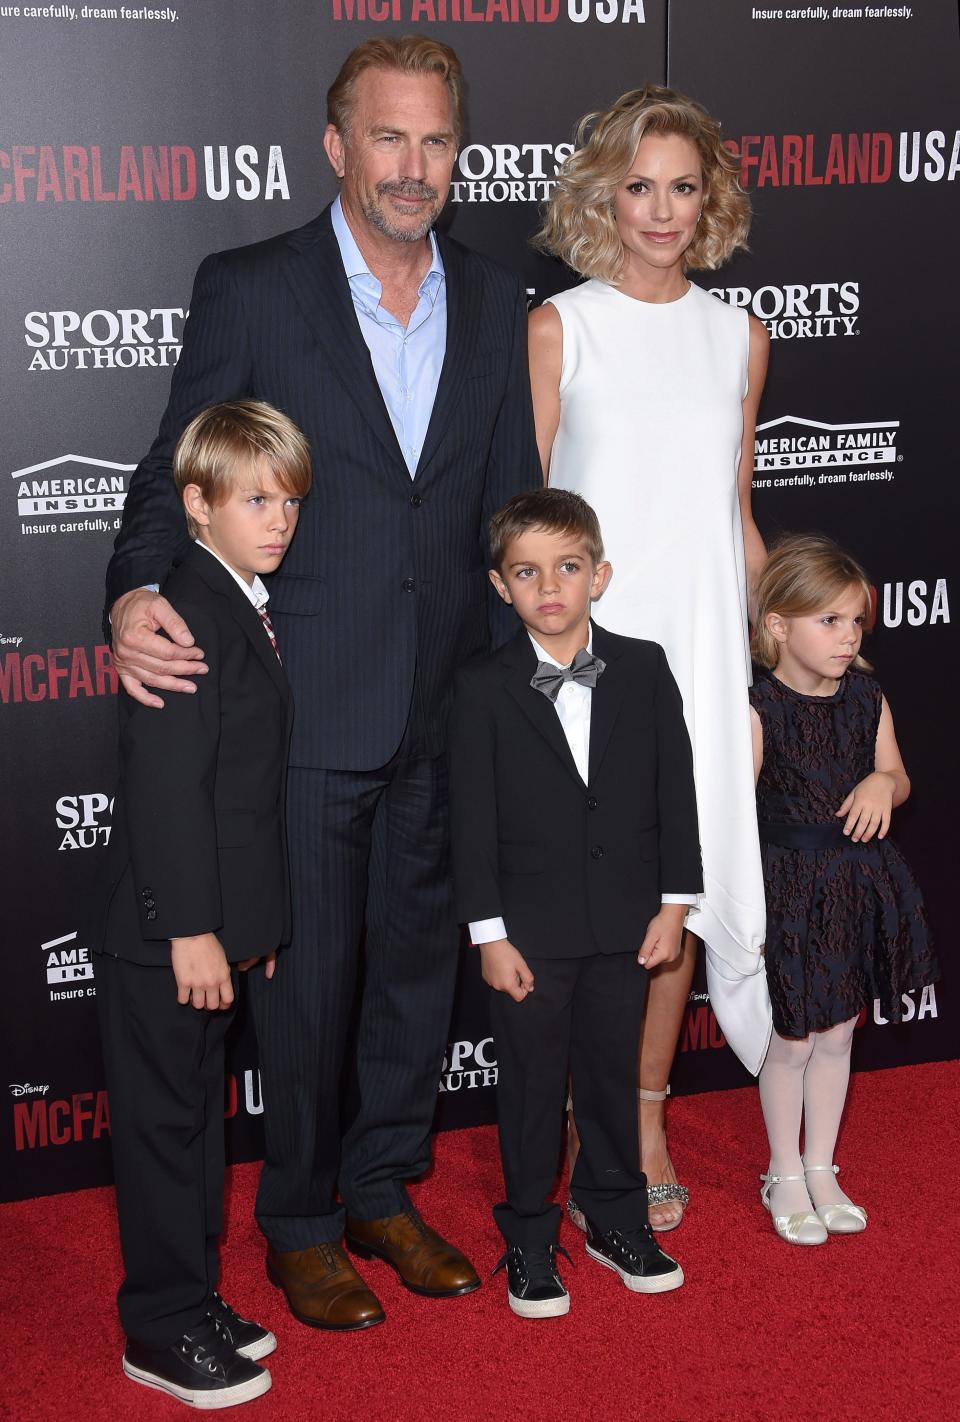 Kevin Costner and Christine Baumgartner with their children Cayden, Hayes, and Grace at the World Premiere of Disney's 'McFarland, USA' in 2015.